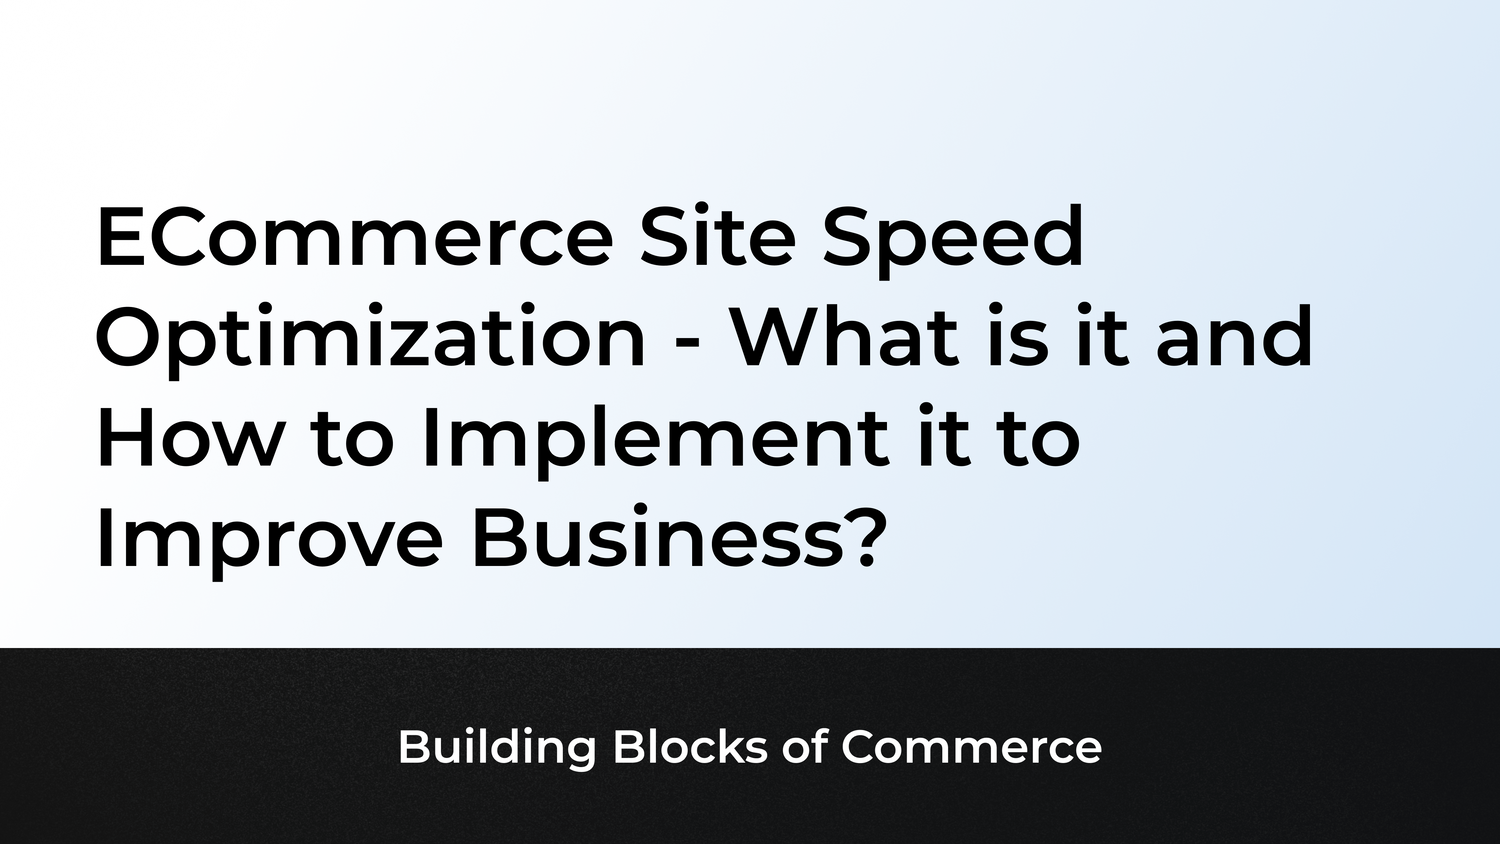 Ecommerce Site Speed Optimization - What is it and How to Implement it to Improve Business?